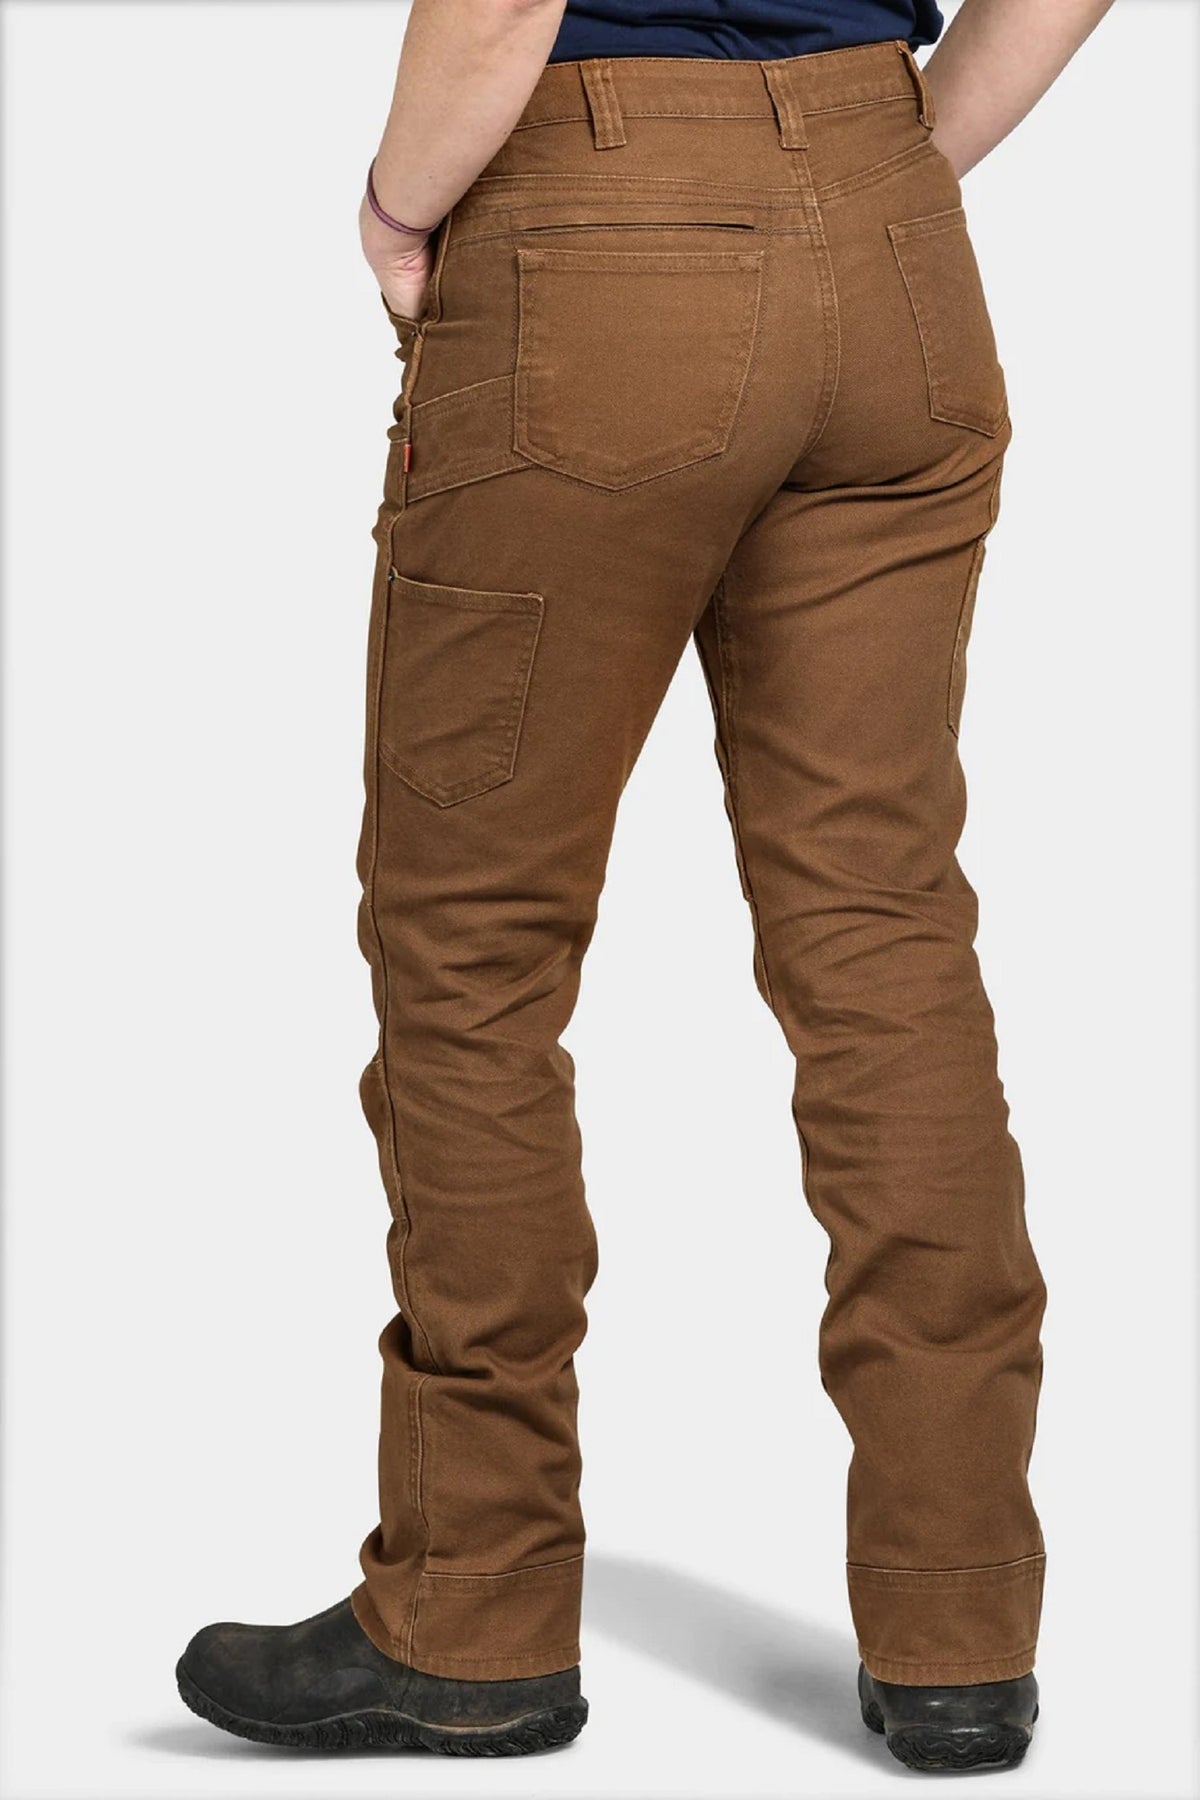 Dovetail Workwear (W) Britt Utility Dble-Front Canvas Pant - Work World - Workwear, Work Boots, Safety Gear